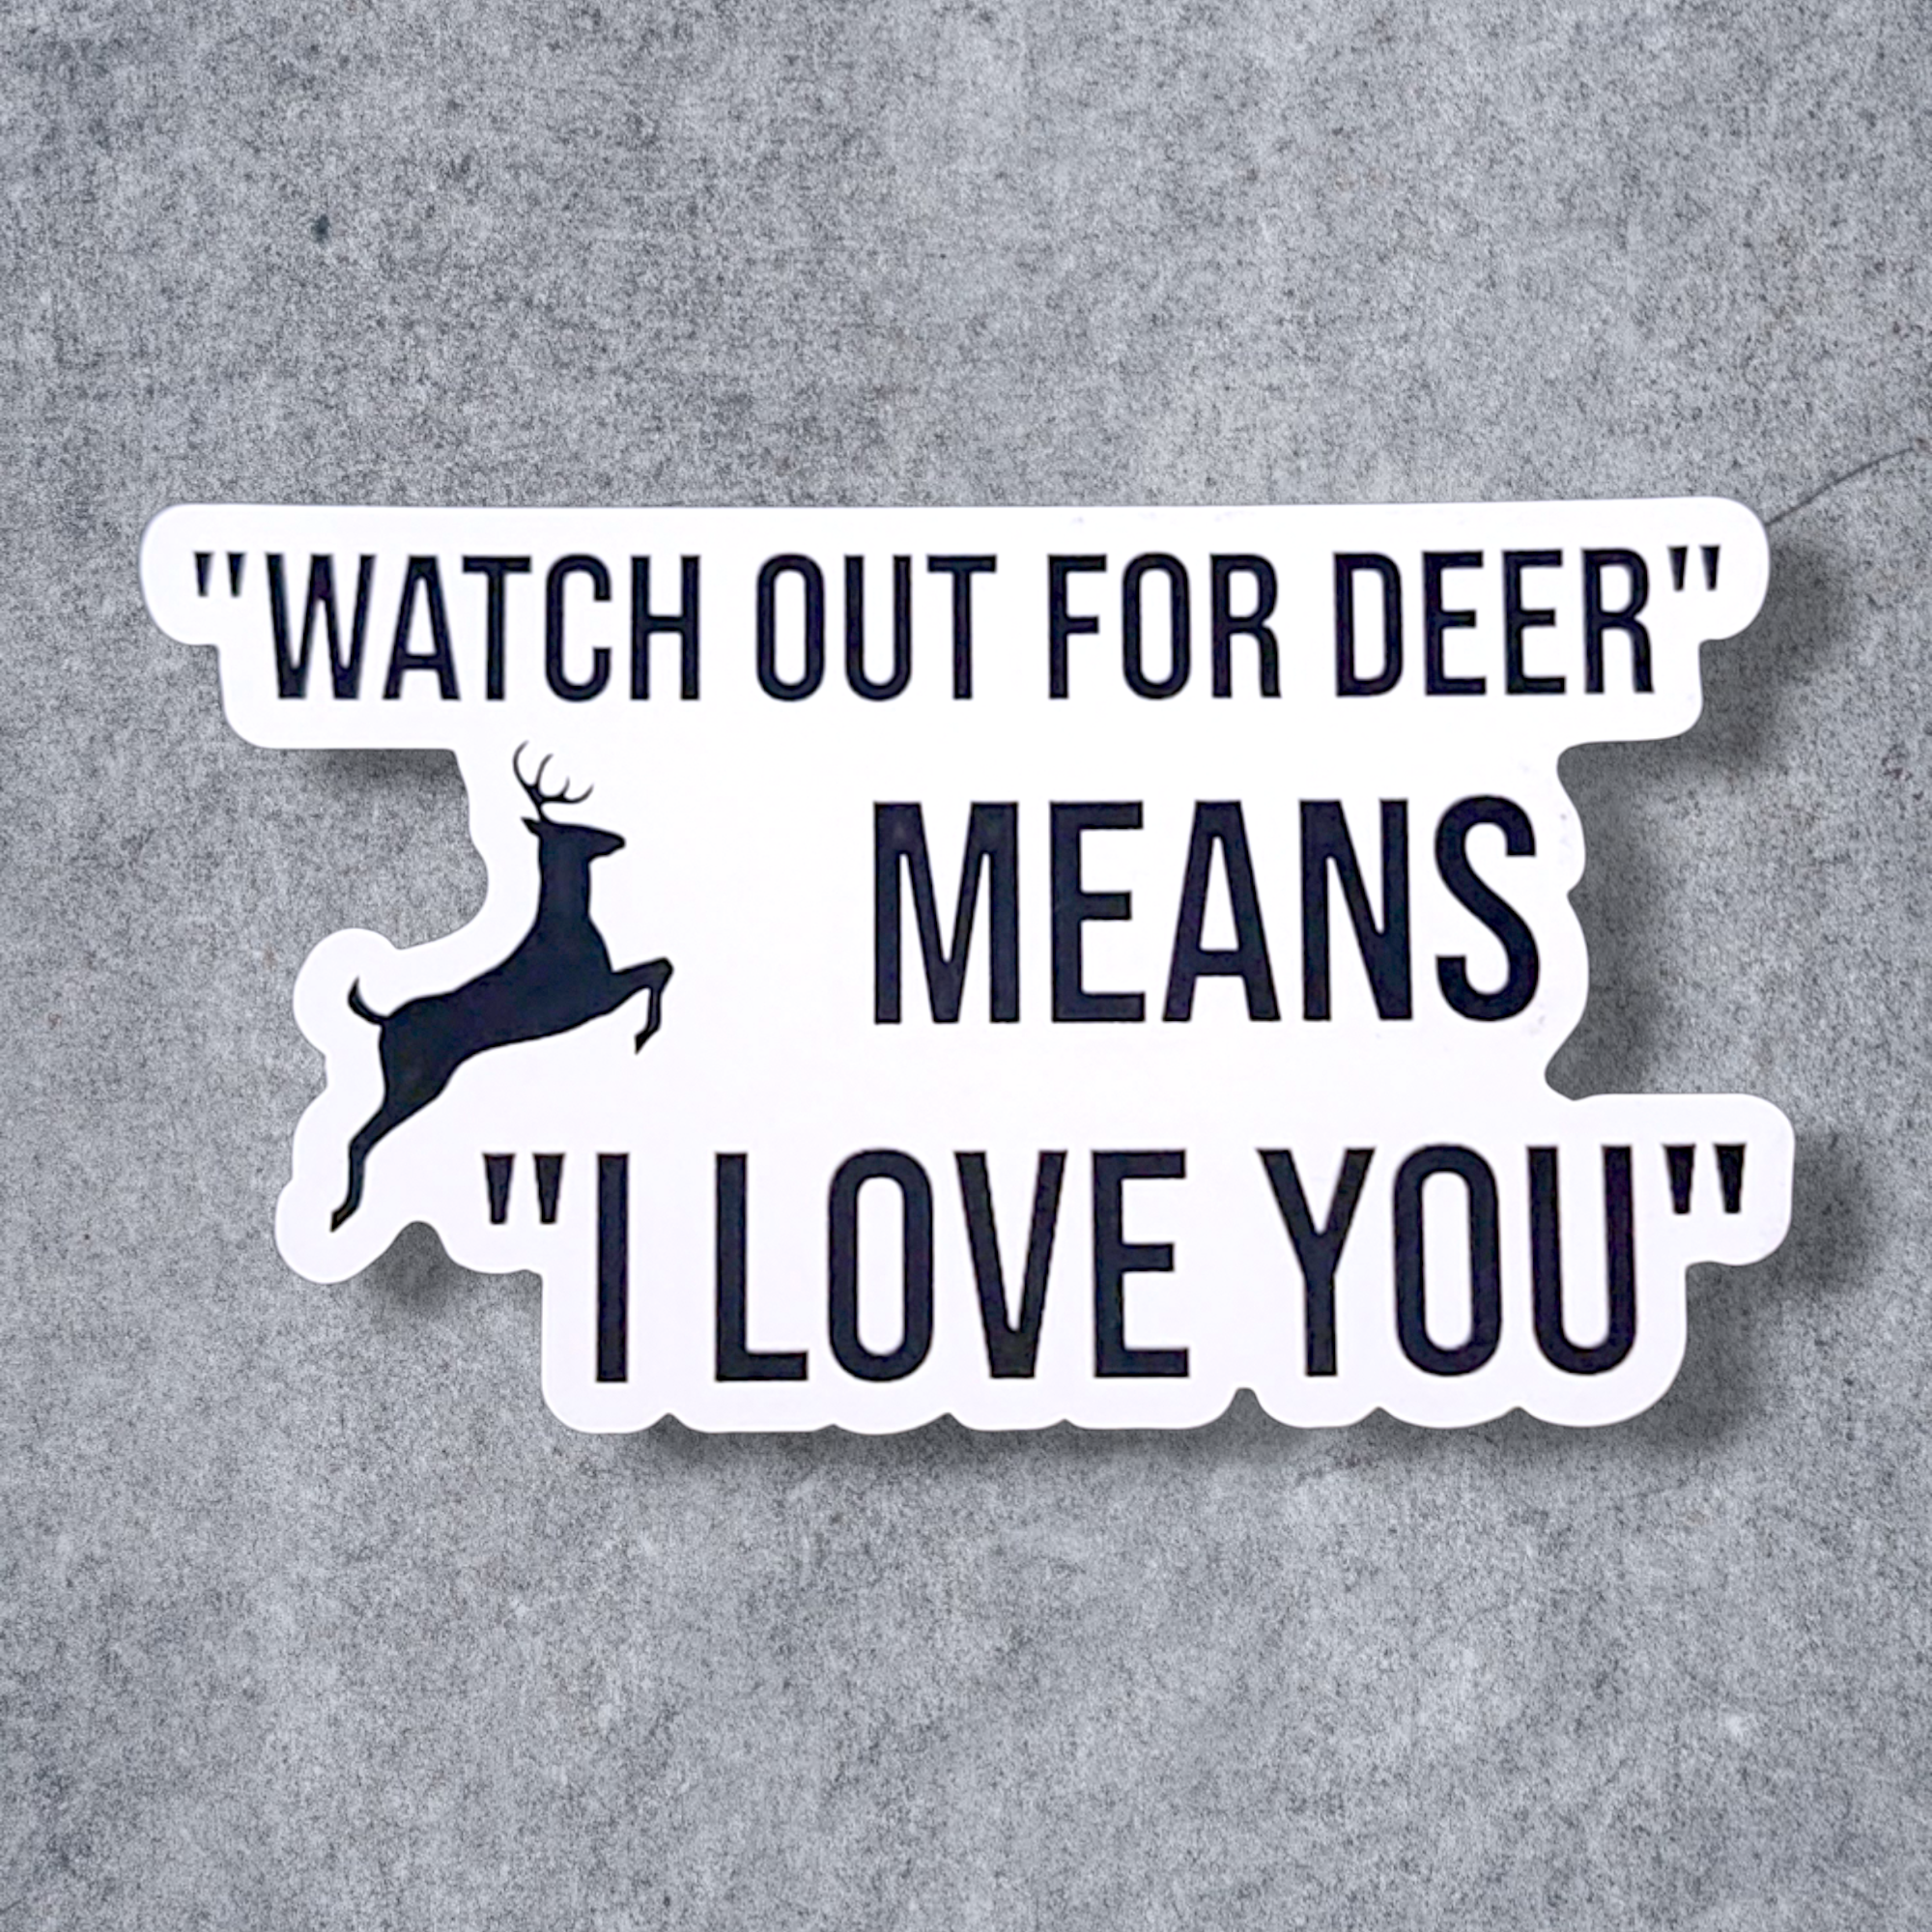 "Watch out for deer means I love you" - Magnet - Travelers Trade Post